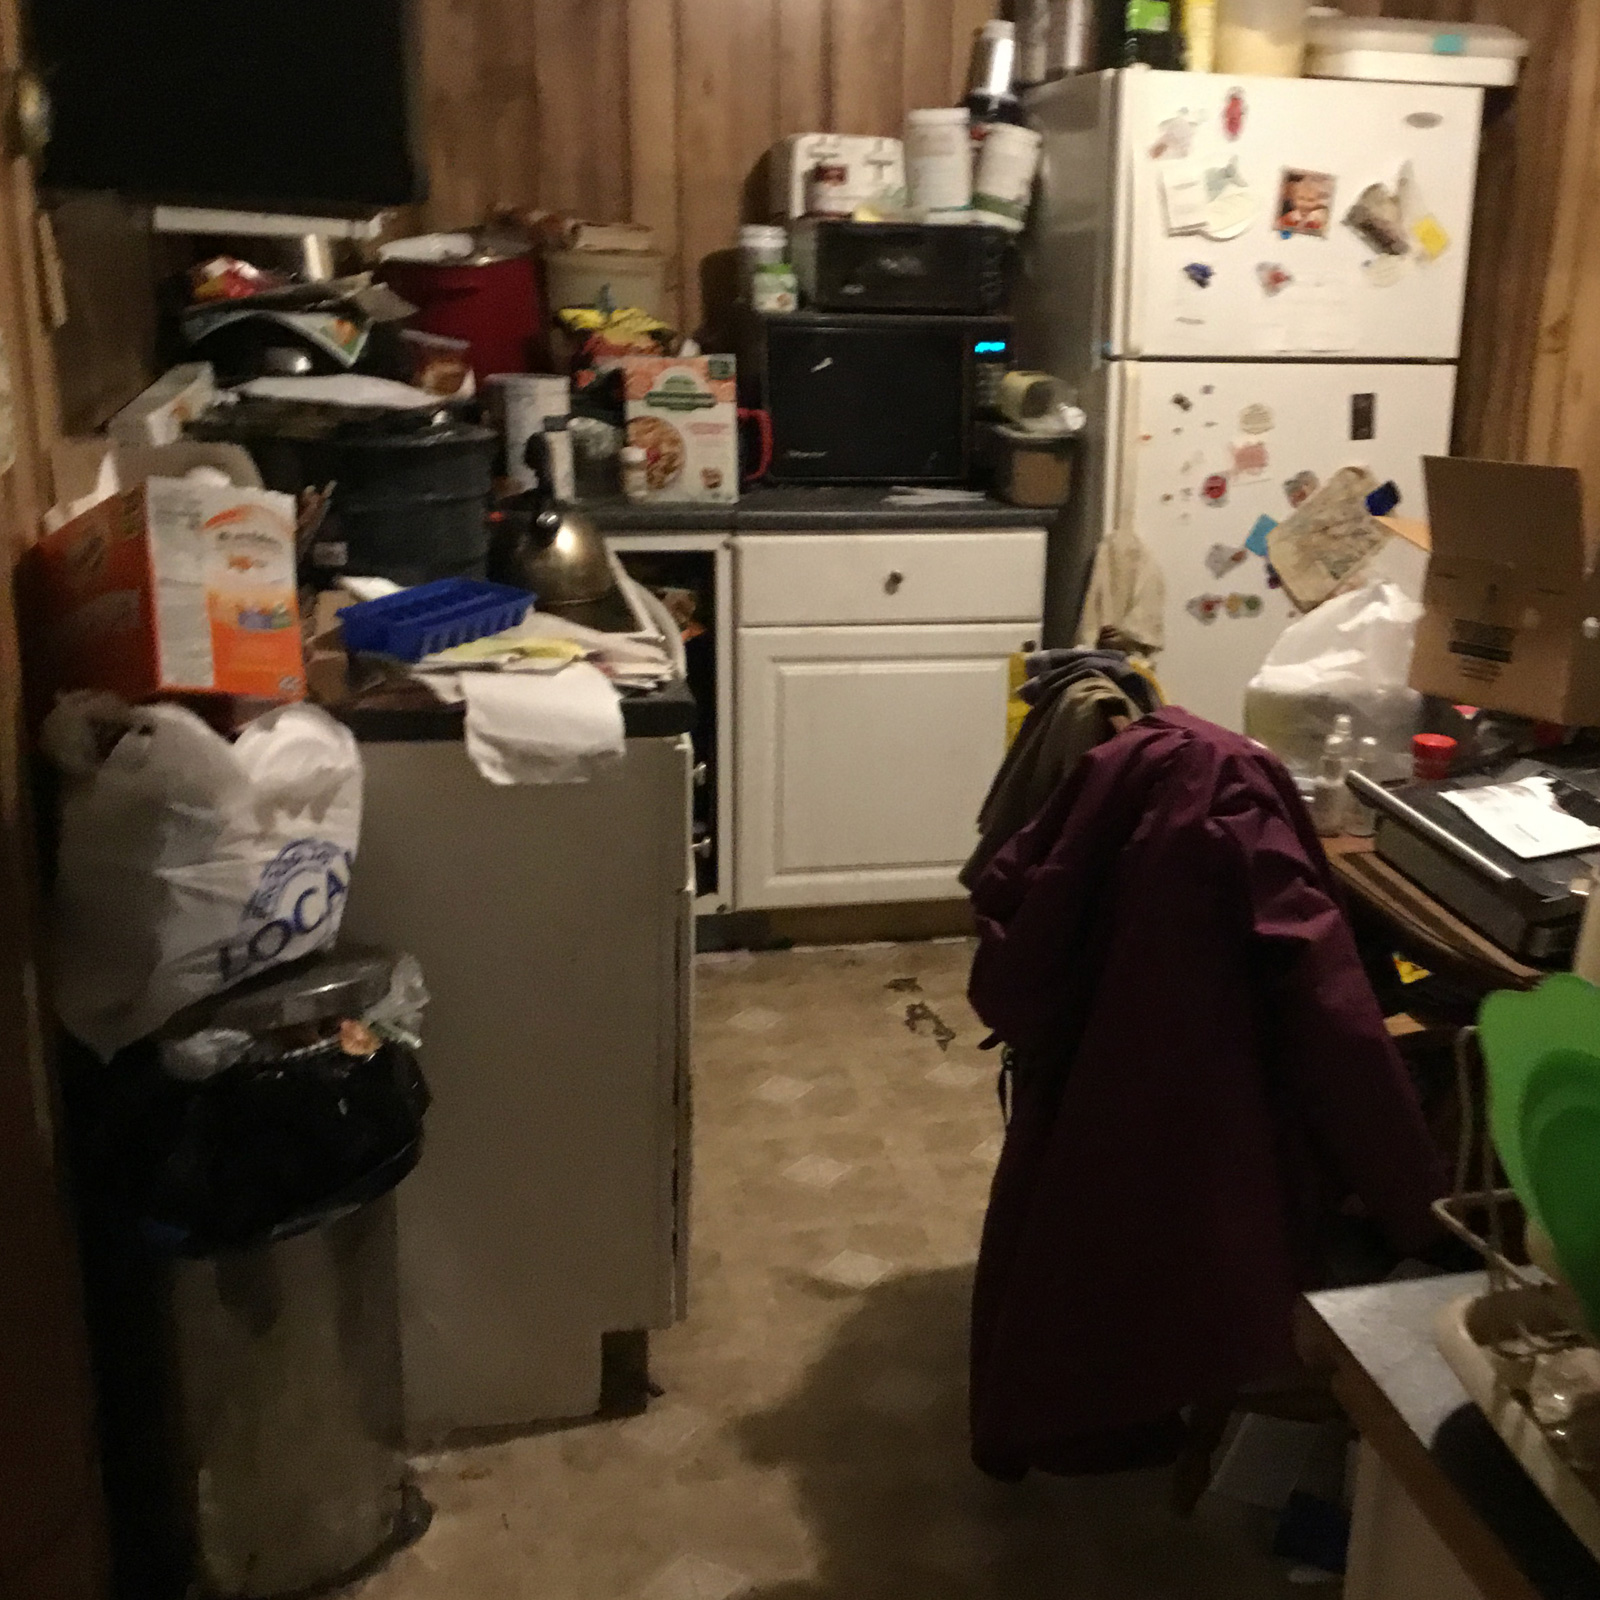 Entry 135 - This nightmare kitchen is in desperate need of help